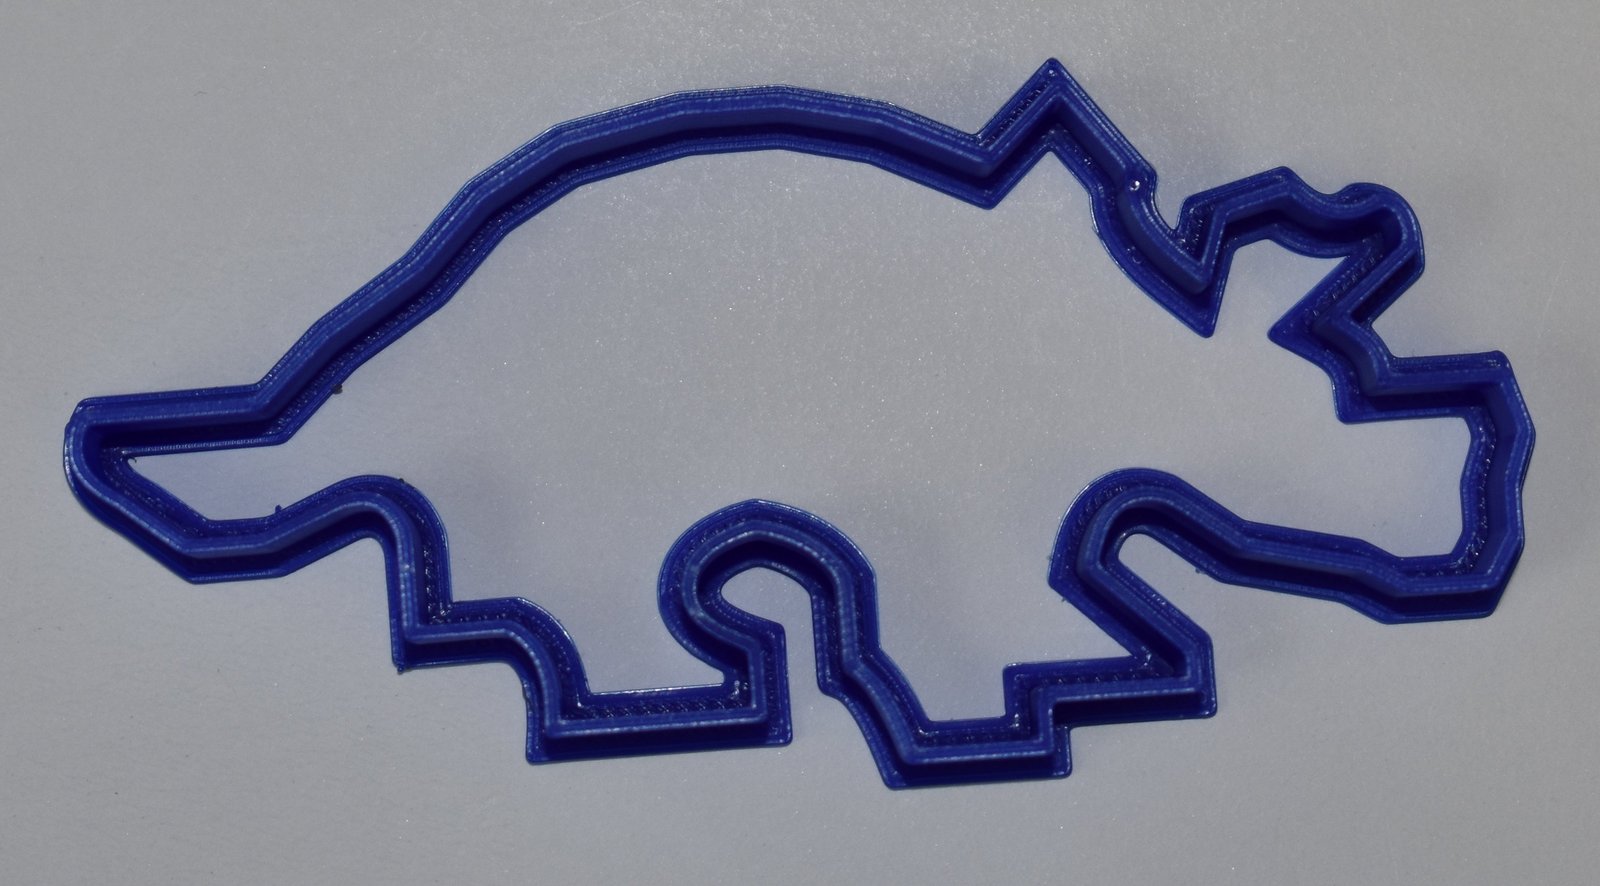 Triceratops Dinosaur Cera Land Before Time Cookie Cutter 3D Printed USA PR643 - $2.99